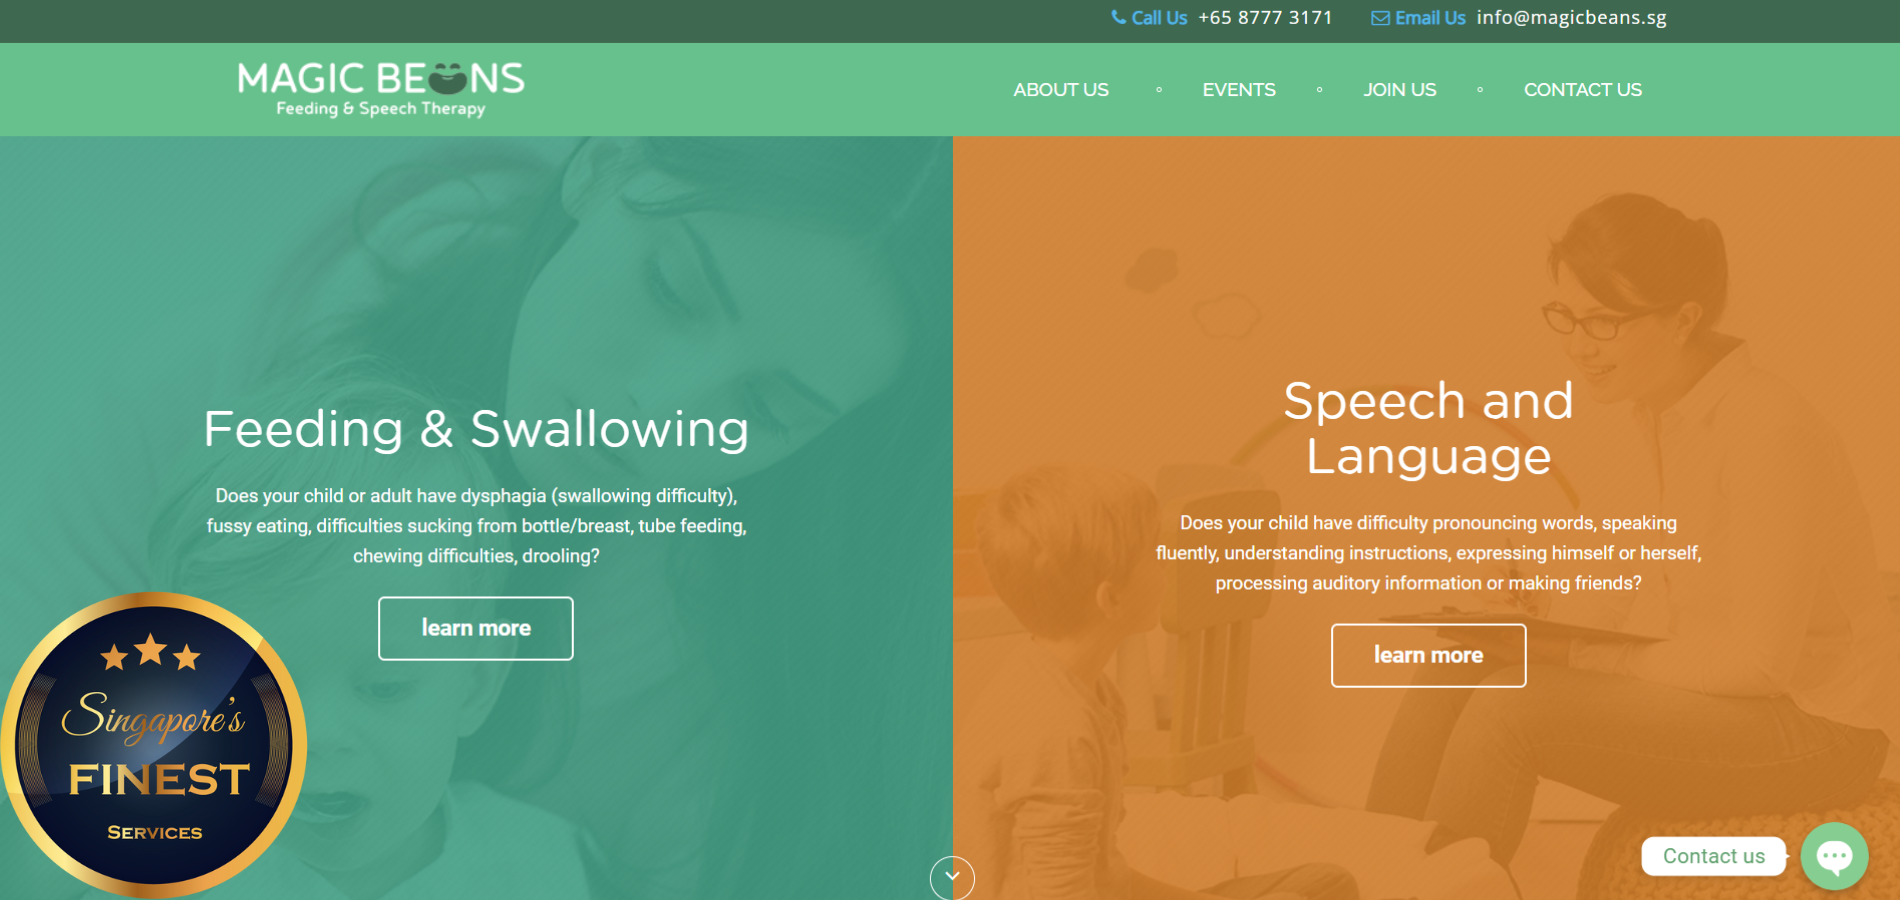 The Finest Clinics For Speech Therapists in Singapore